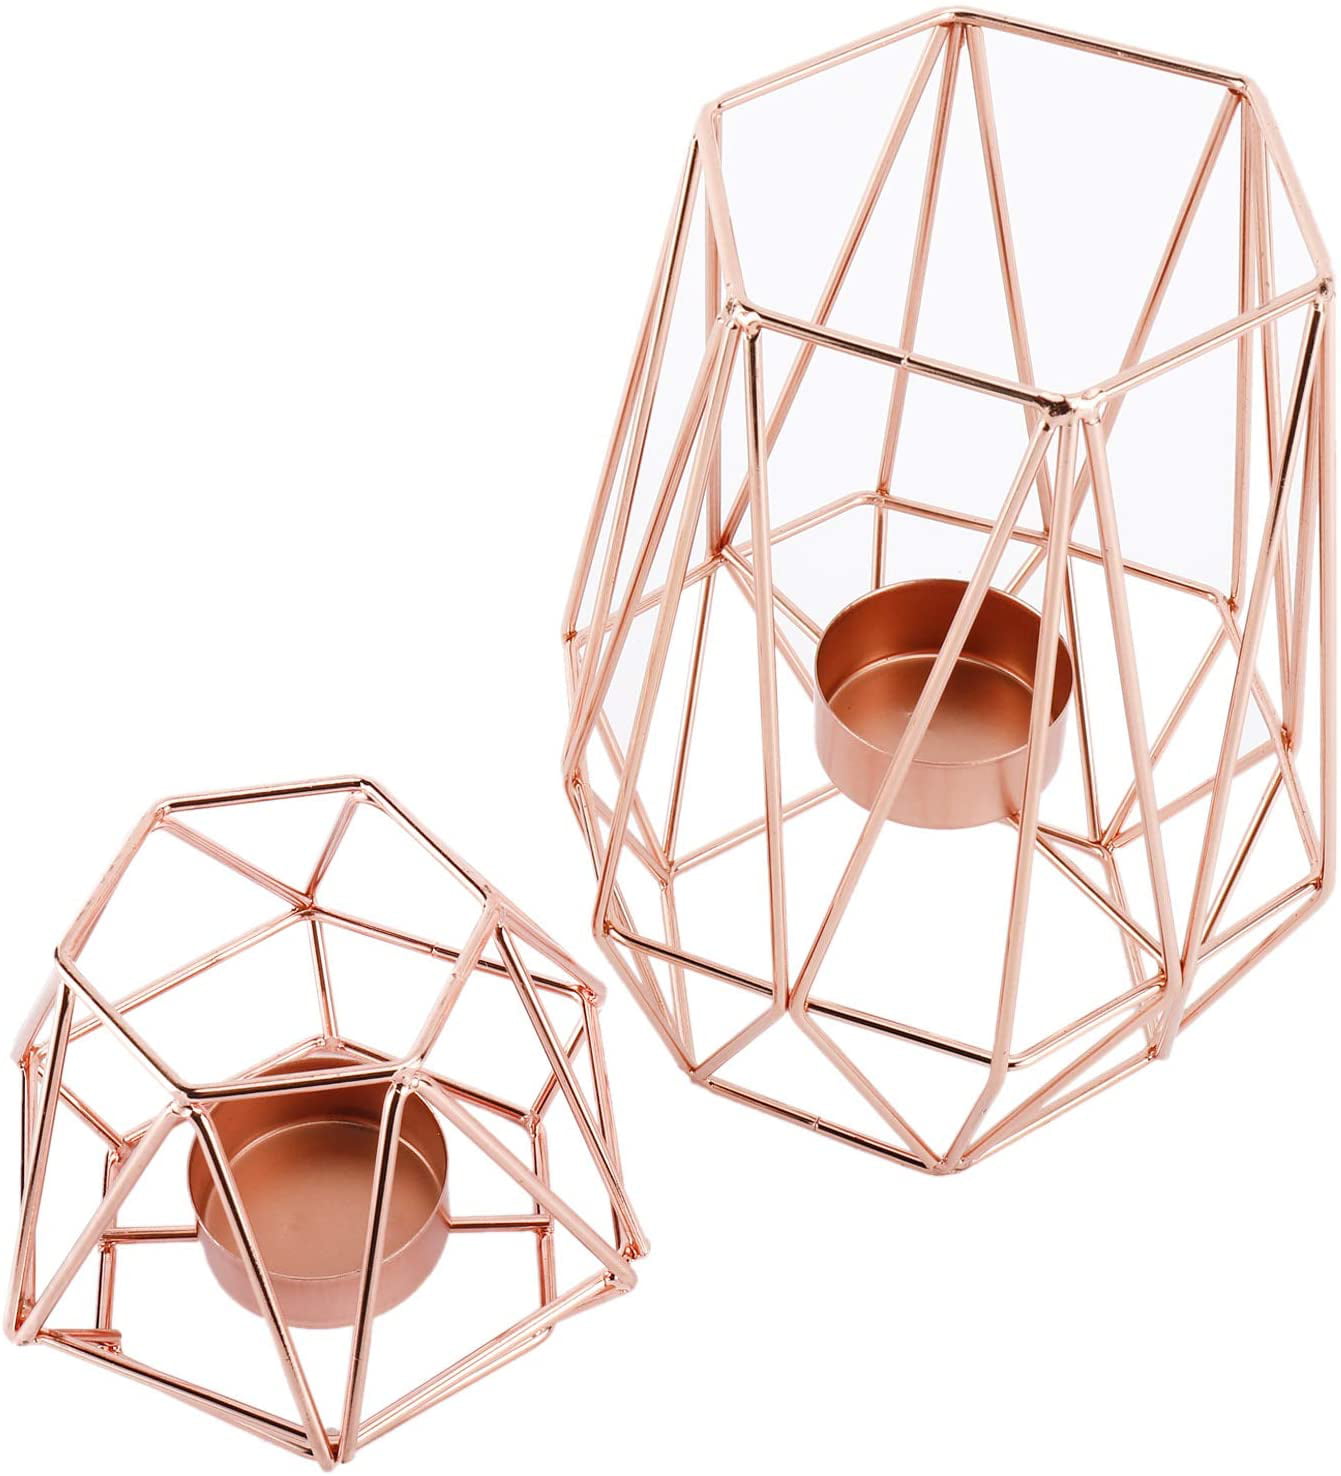 Rose Gold Set of 2 HighFree Geometric Candle Holders Metal Wire Iron Tealight Candle Holders for Tables Decor Living Room Bathroom Decorations